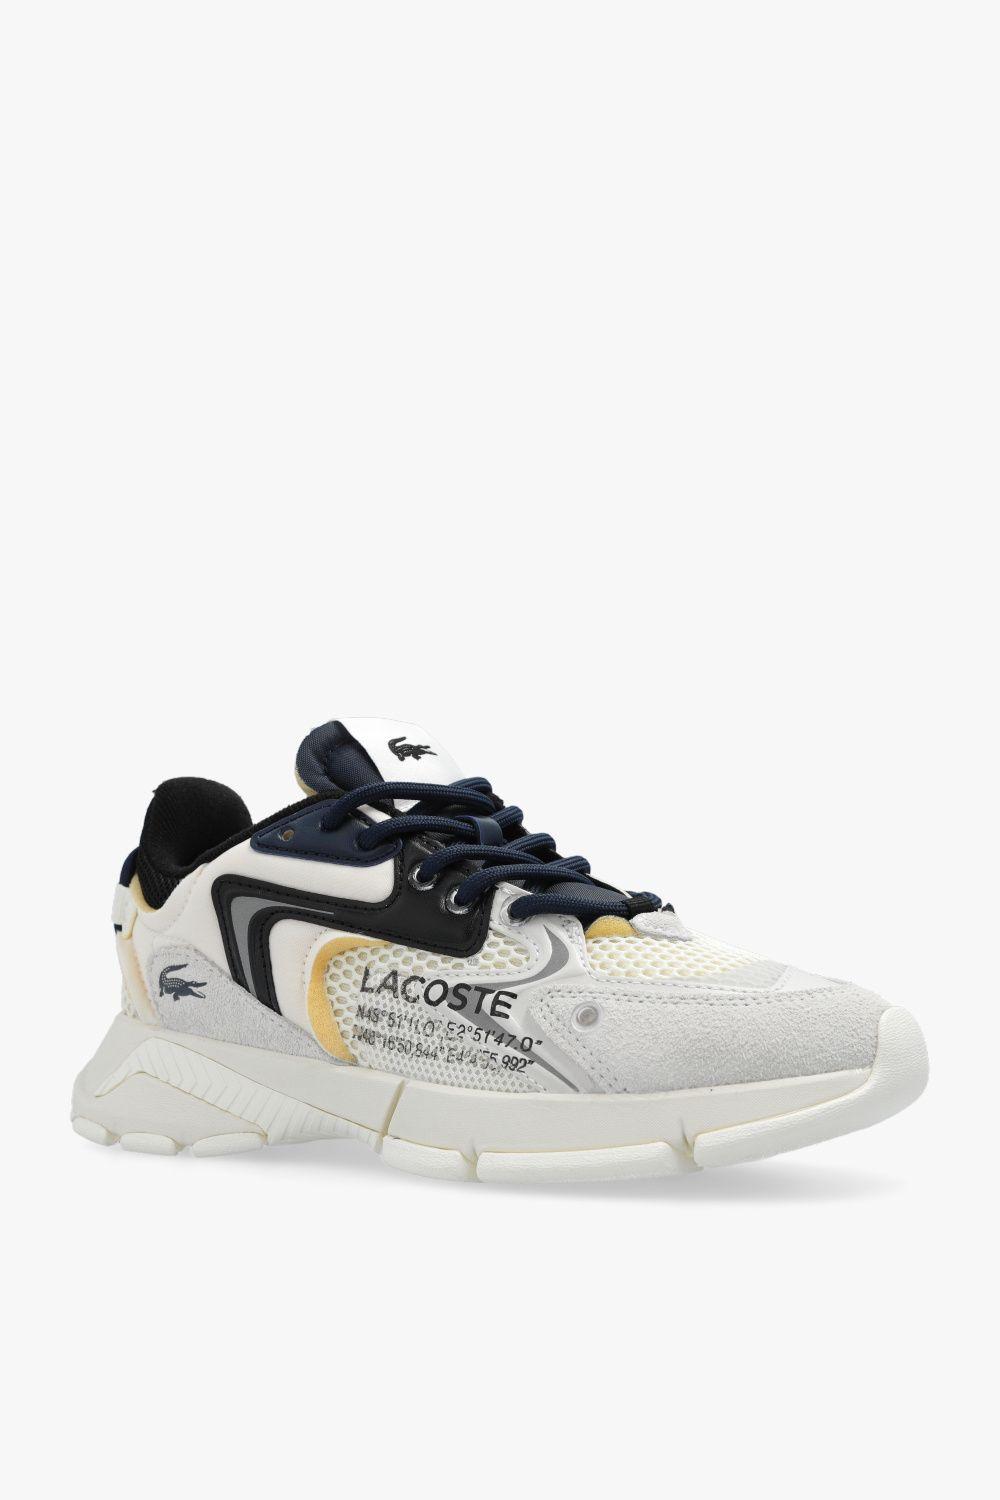 milits chef At bygge Lacoste 'l003 Neo' Sneakers in White | Lyst